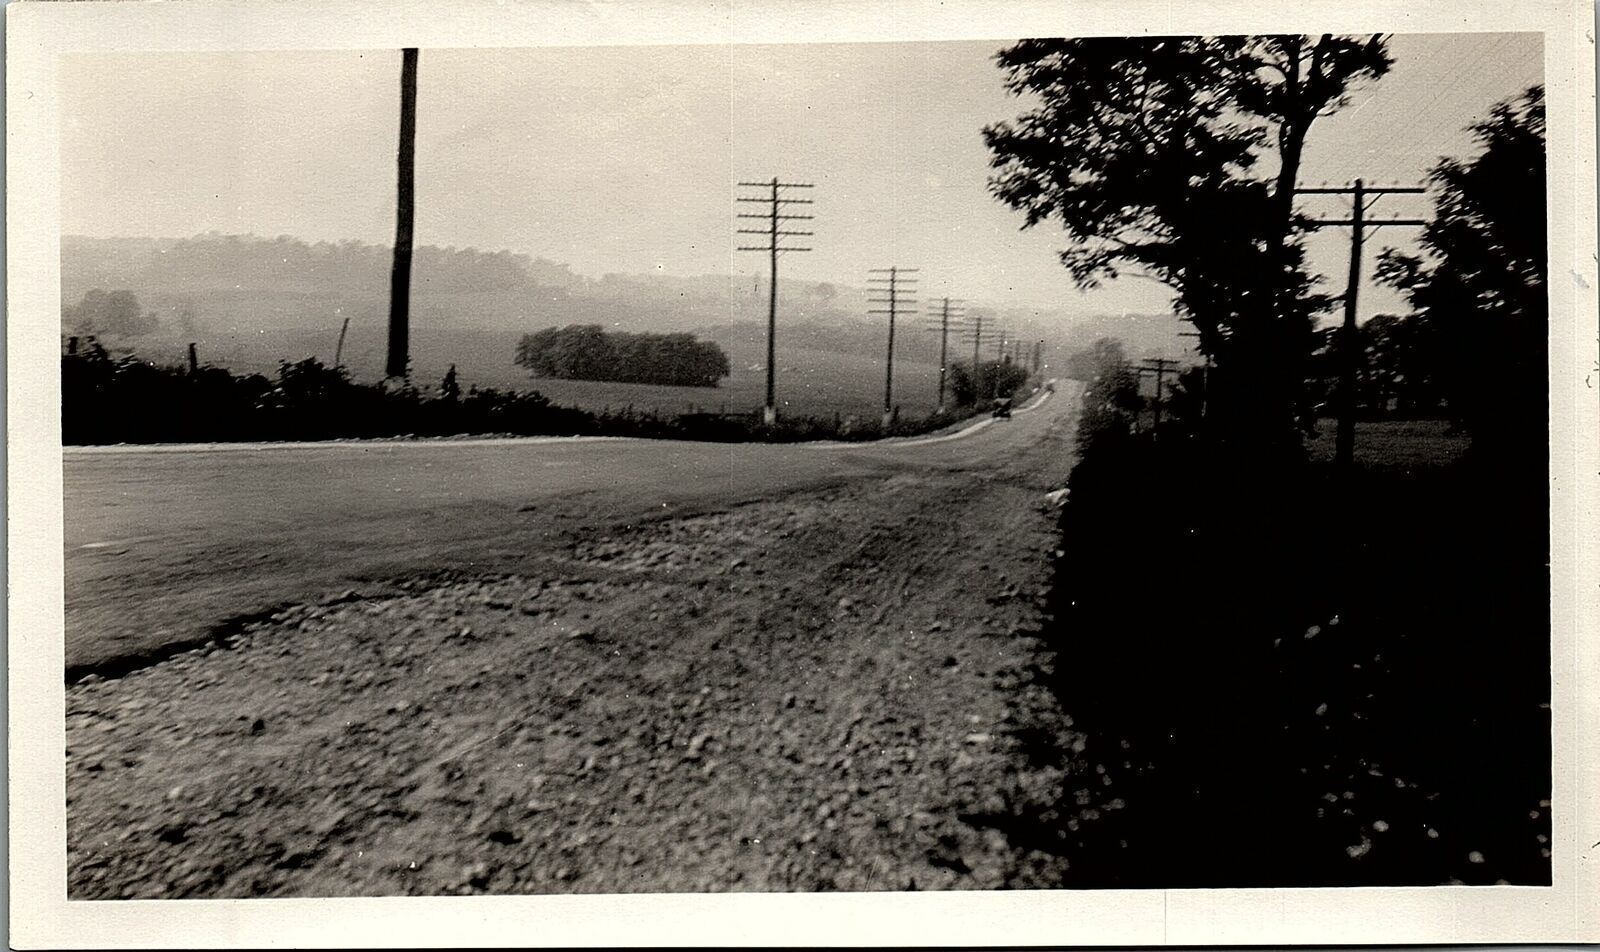 c1930 RURAL EARLY PAVED ROAD POWER POLES AUTOMOBILES  REAL PHOTOGRAPH 34-34